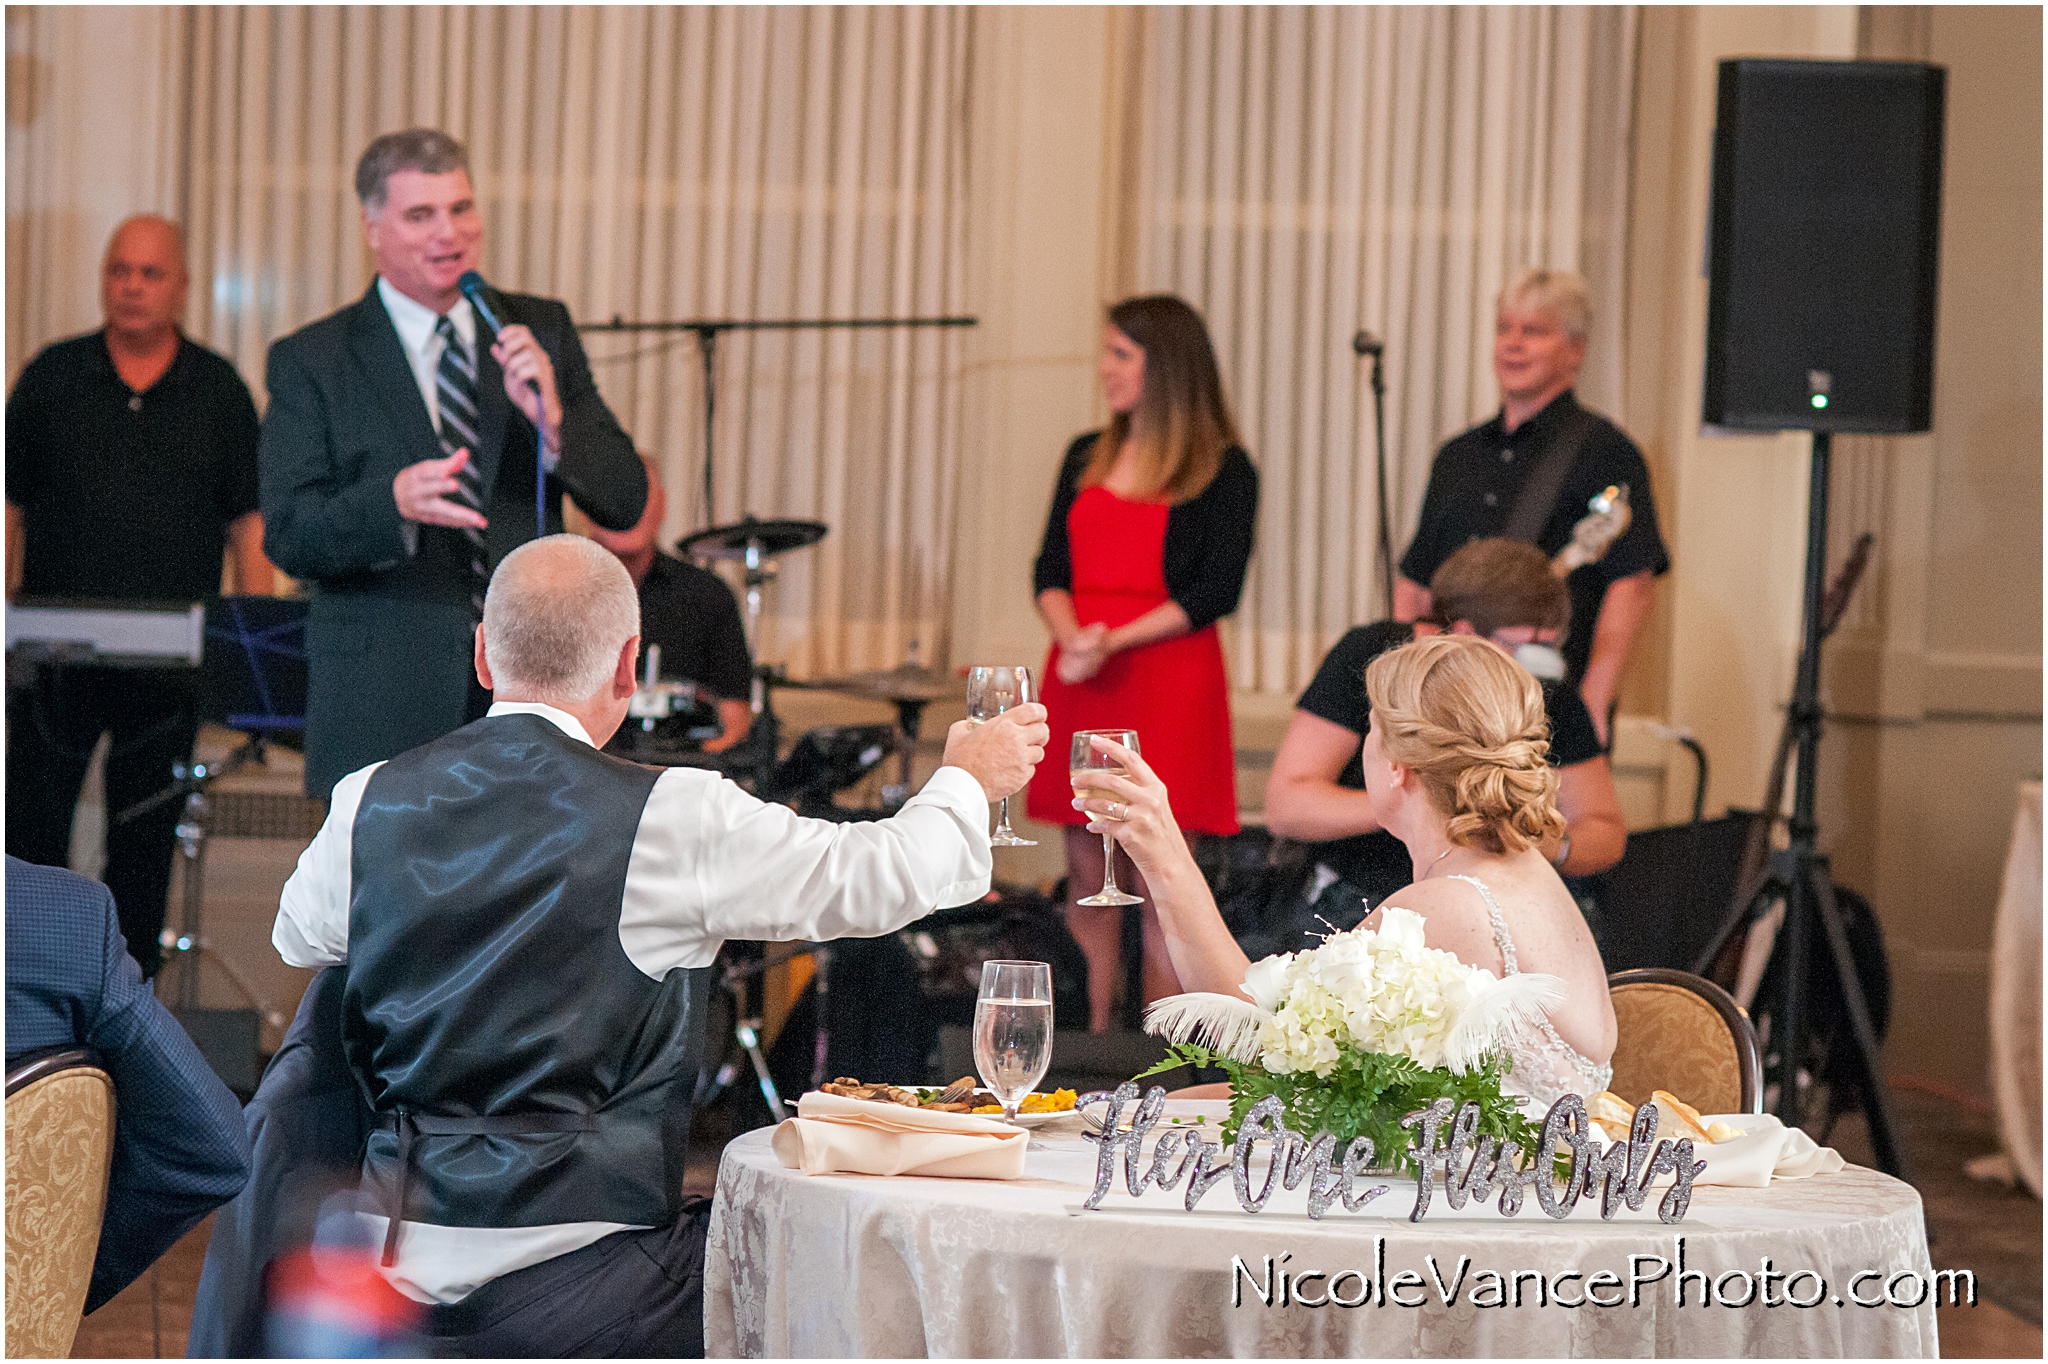 A toast to the bride and groom at the Hotel John Marshall.